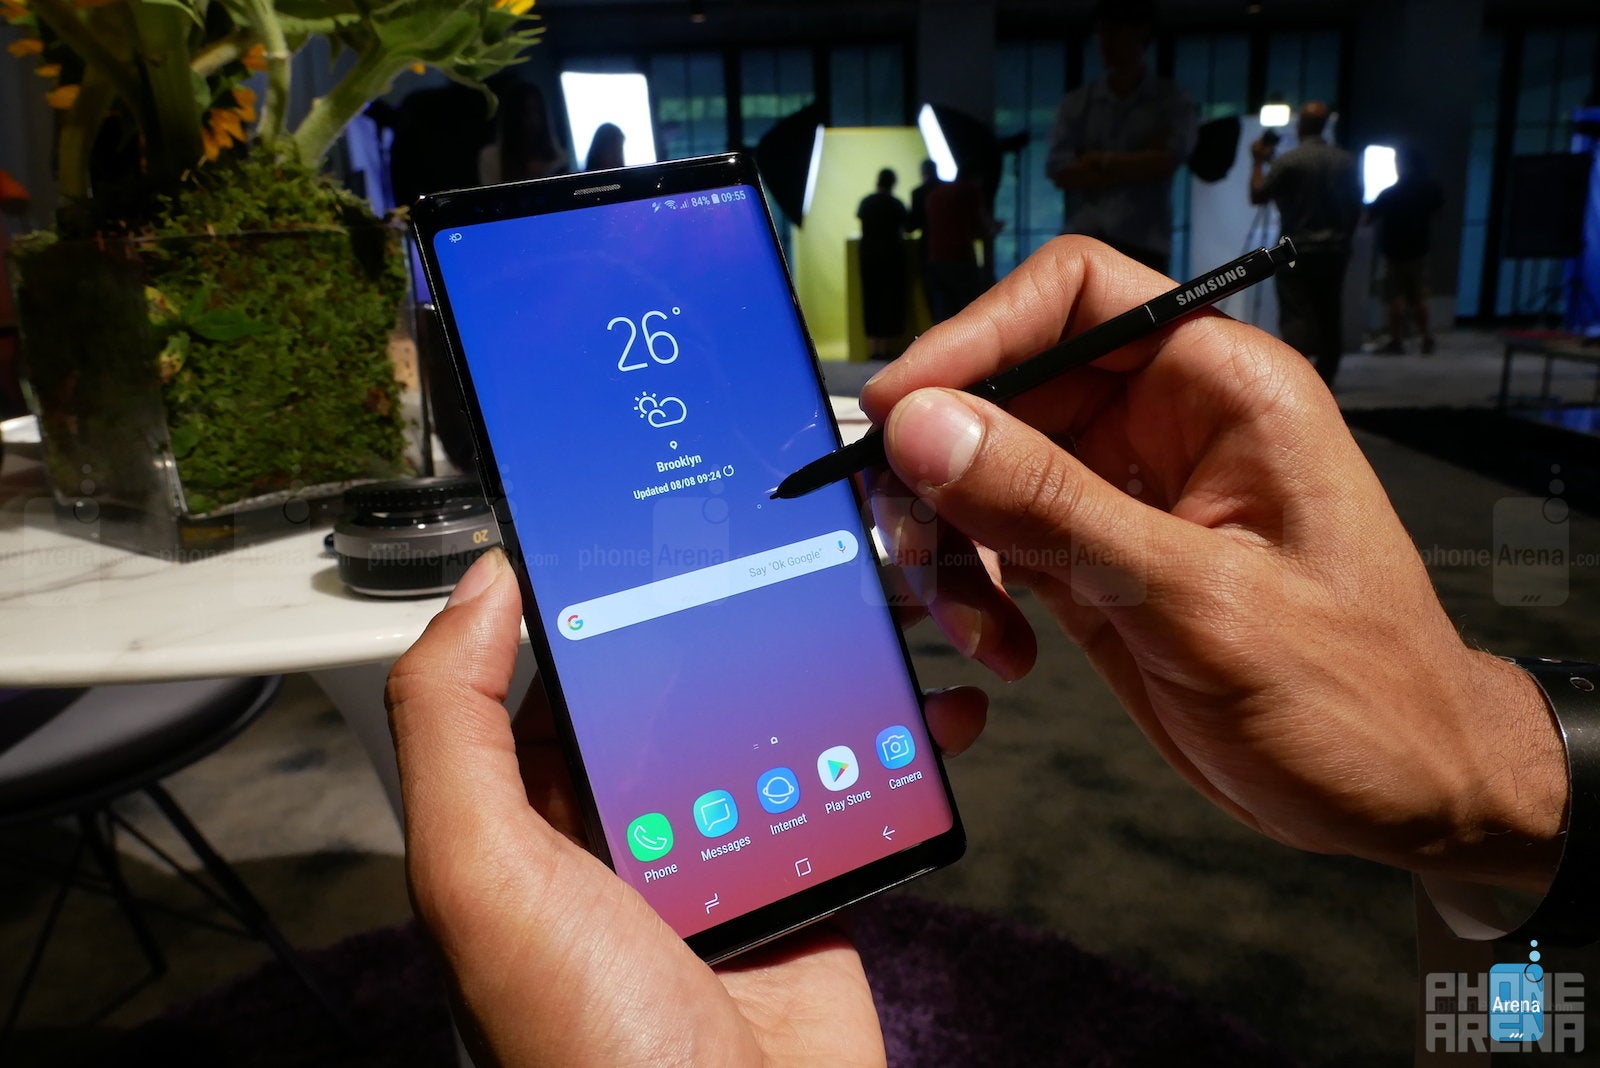 Samsung Galaxy Note 9 vs. LG G7 ThinQ: ThinQ size is everything?